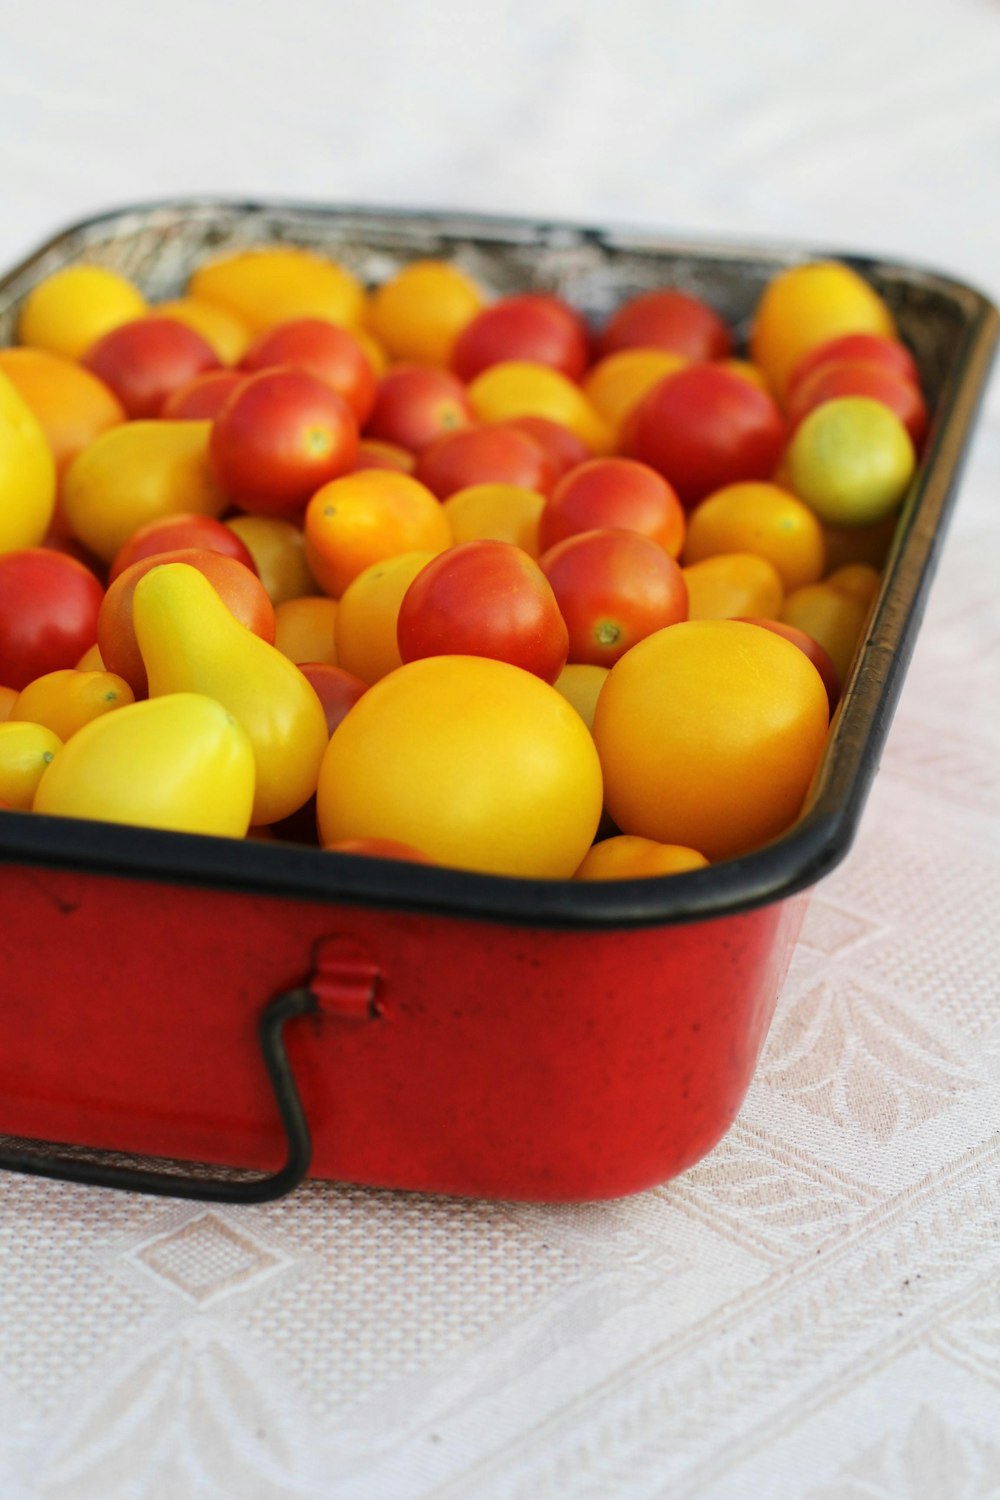 yellow and red fruits in red plastic container